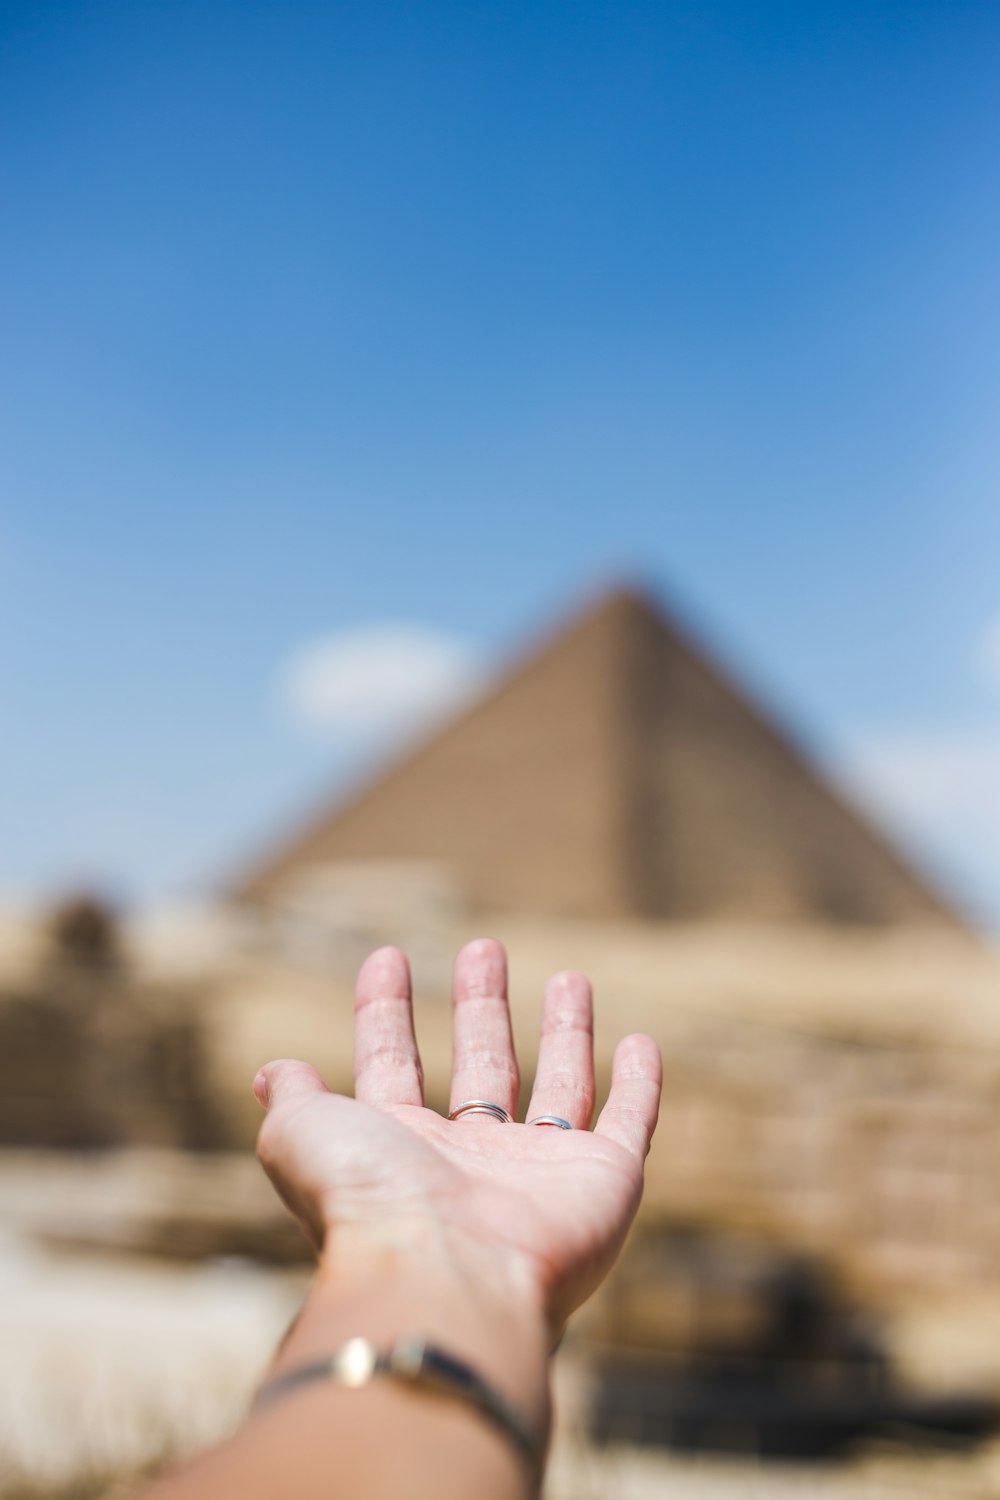 a person's hand reaching out towards a pyramid